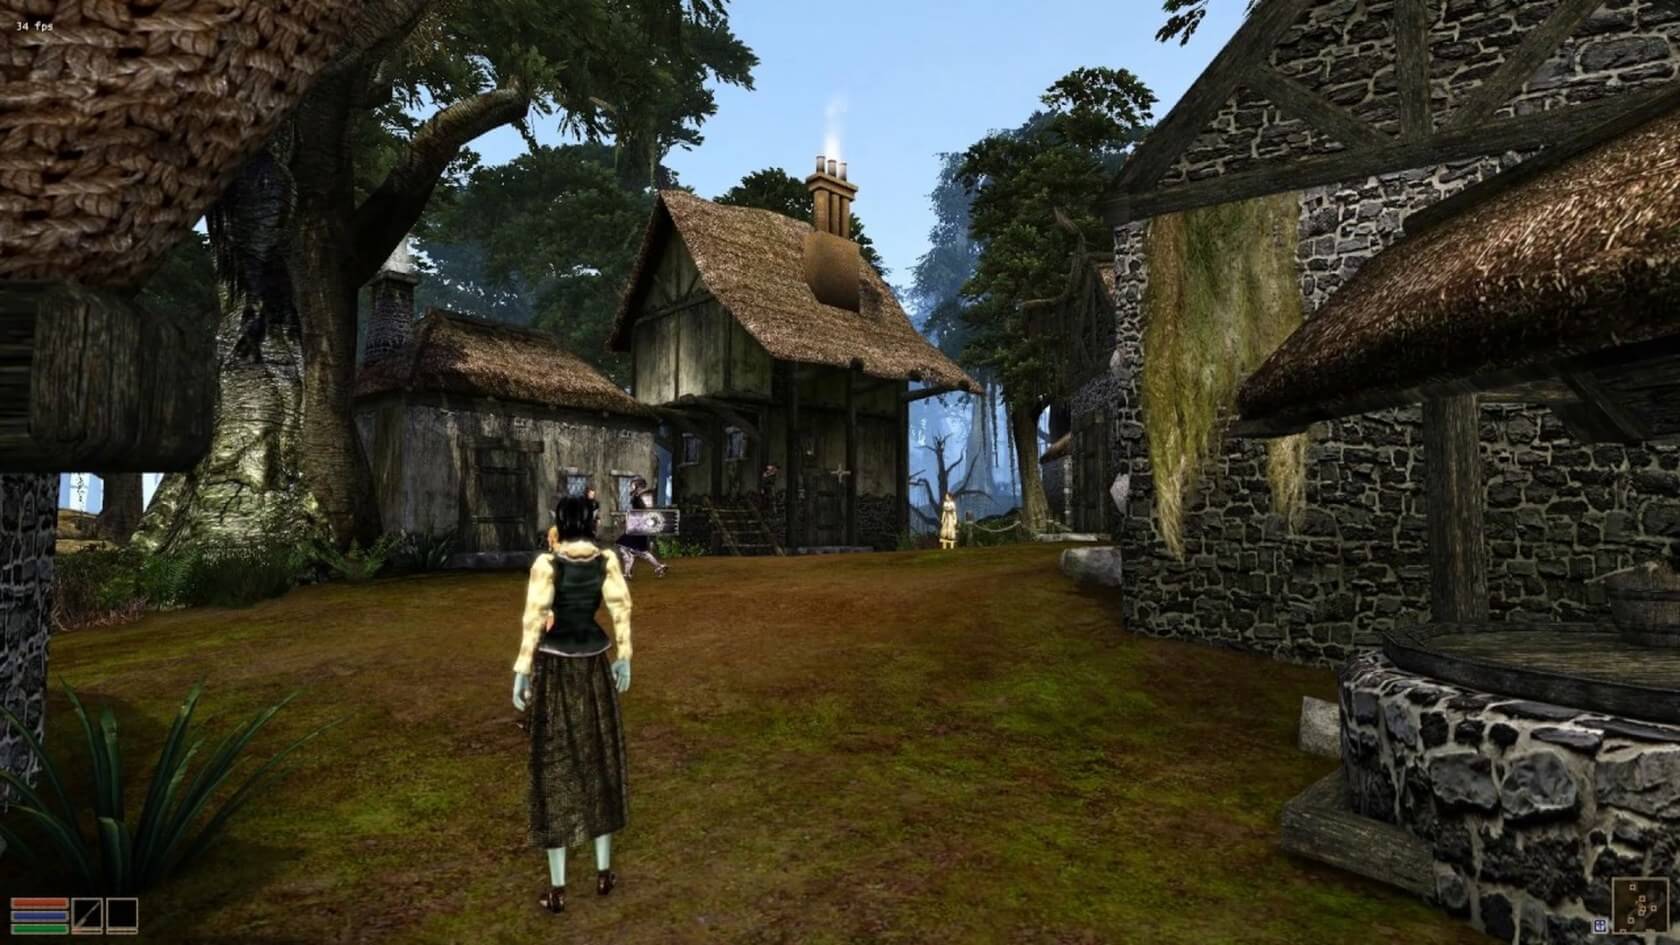 Grab a free copy of Morrowind to celebrate 25 years of The Elder Scrolls